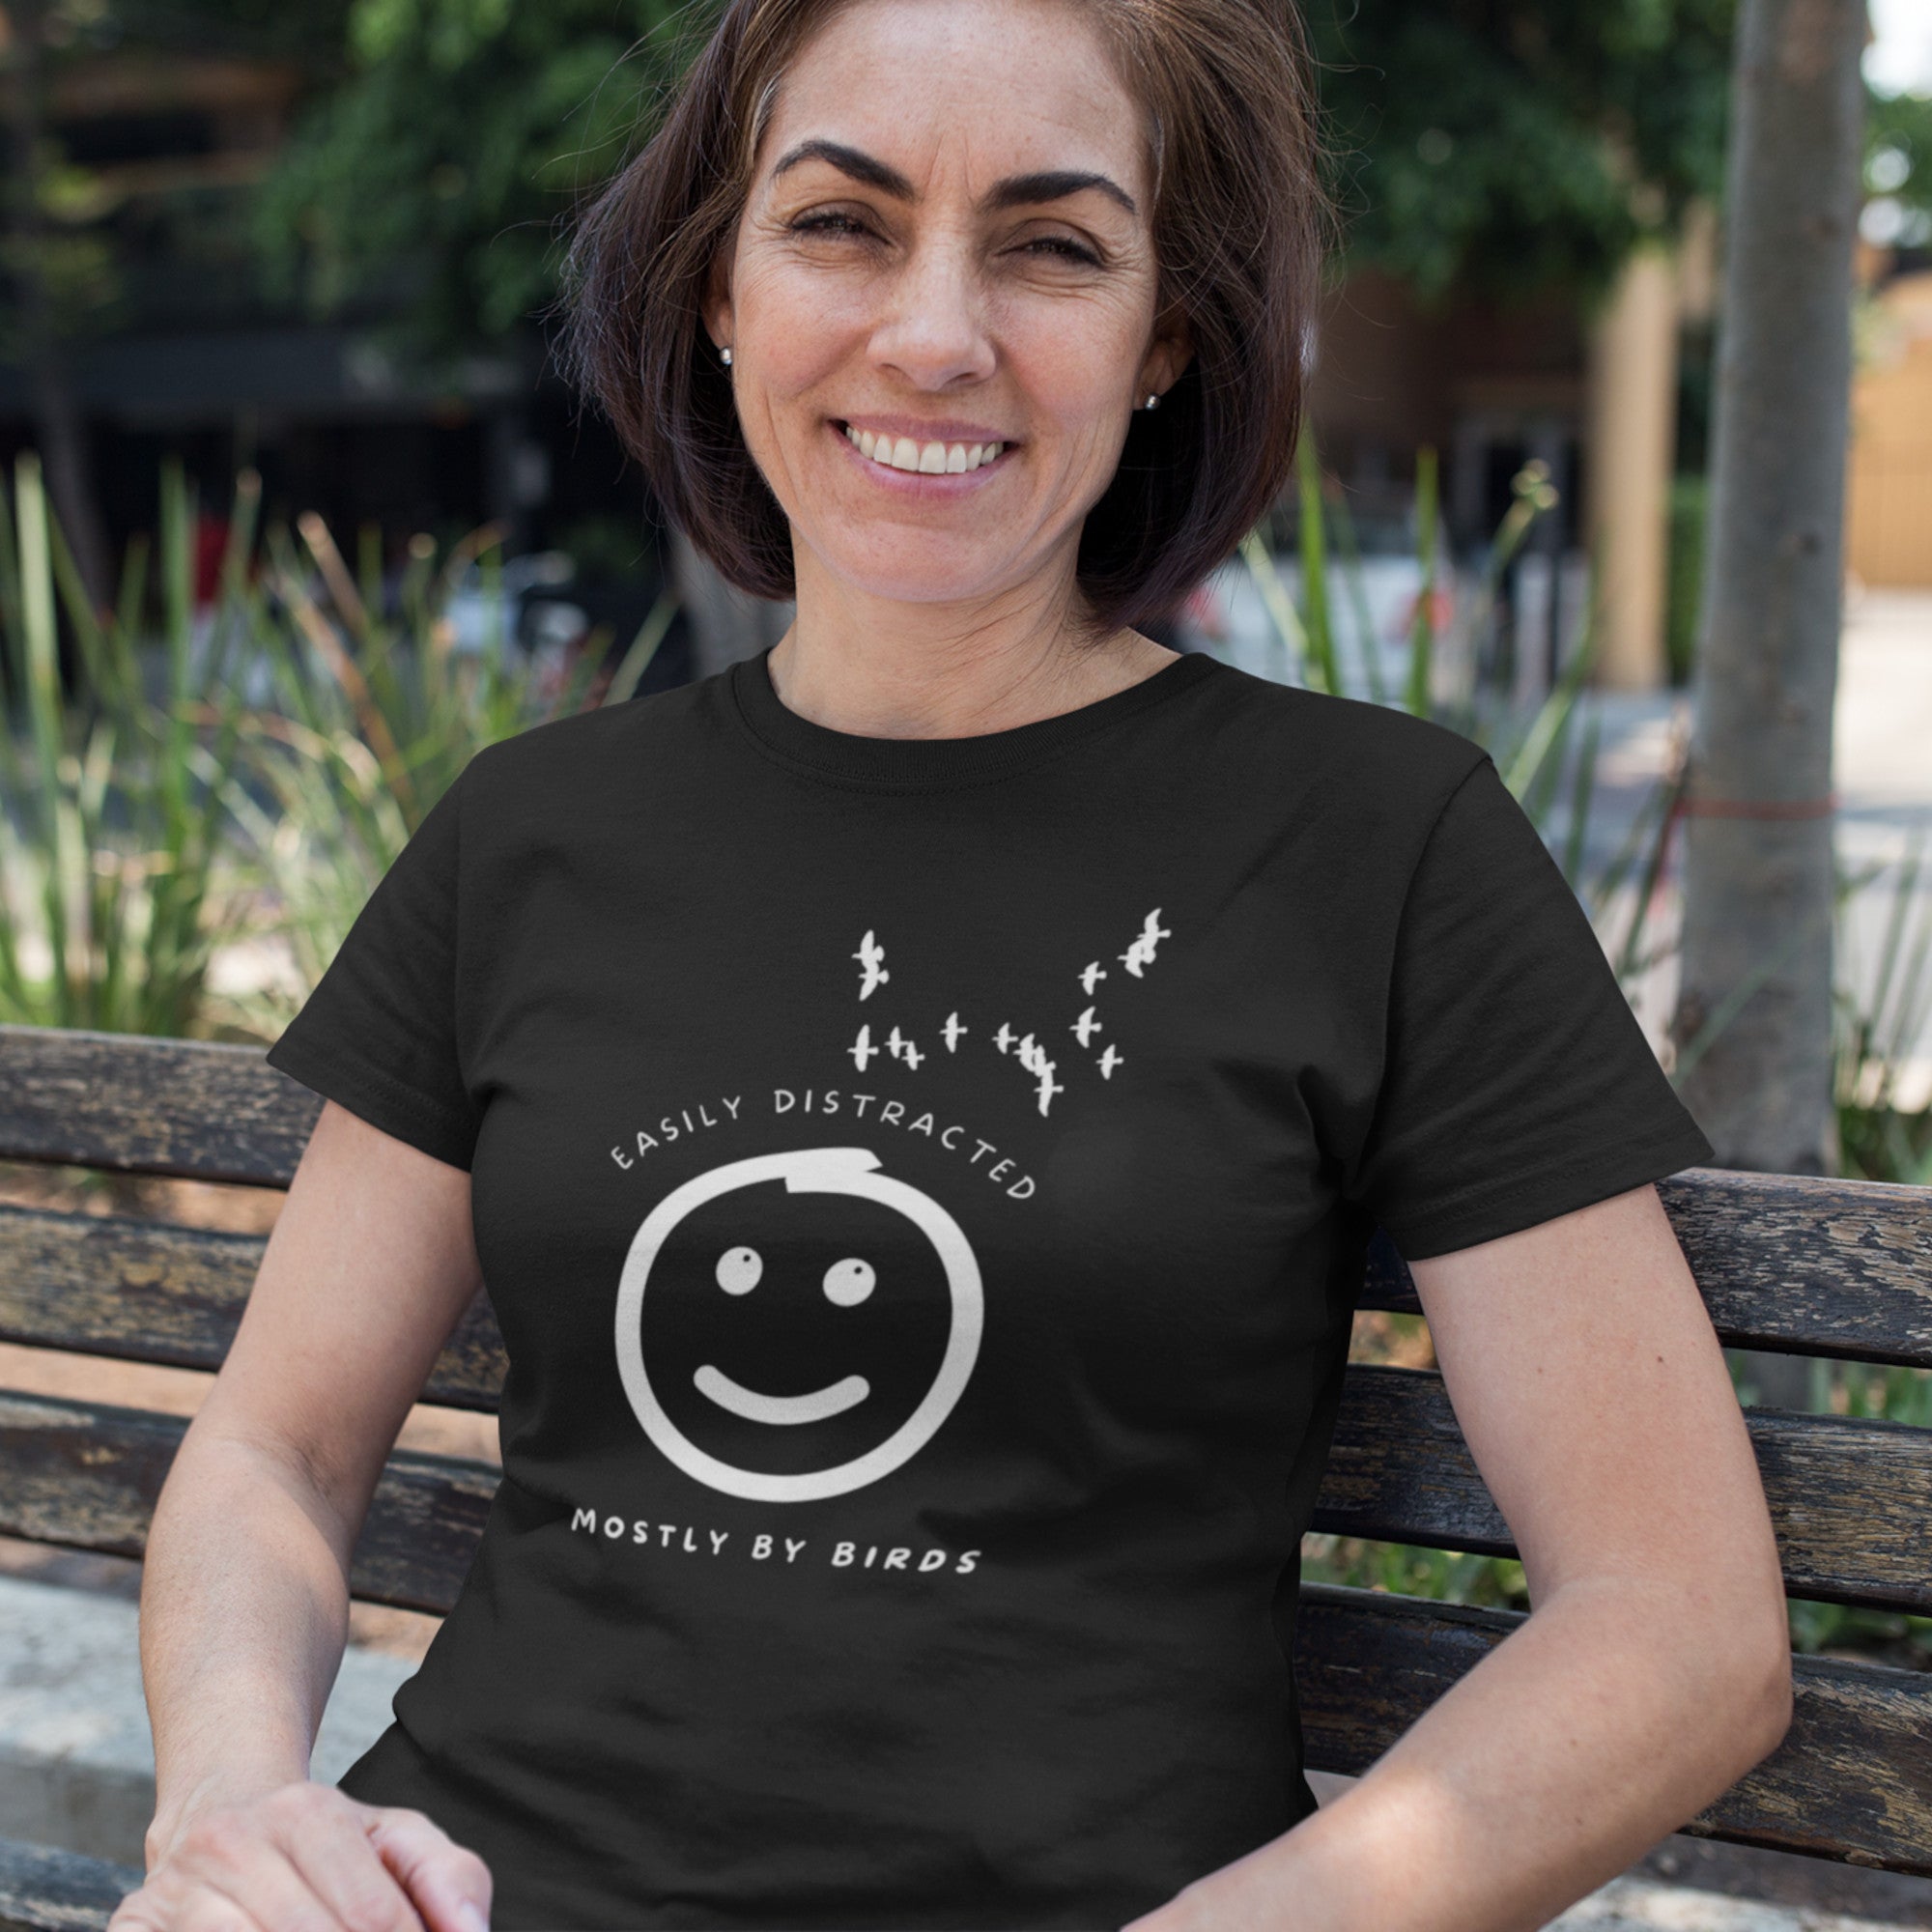 Black unisex bird t-shirt with a smiley face looking up and to the side at a flock of birds surrounded by the words, "Easily Distracted" above and, "Mostly by Birds" below. Worn by a woman sitting on a park bench.